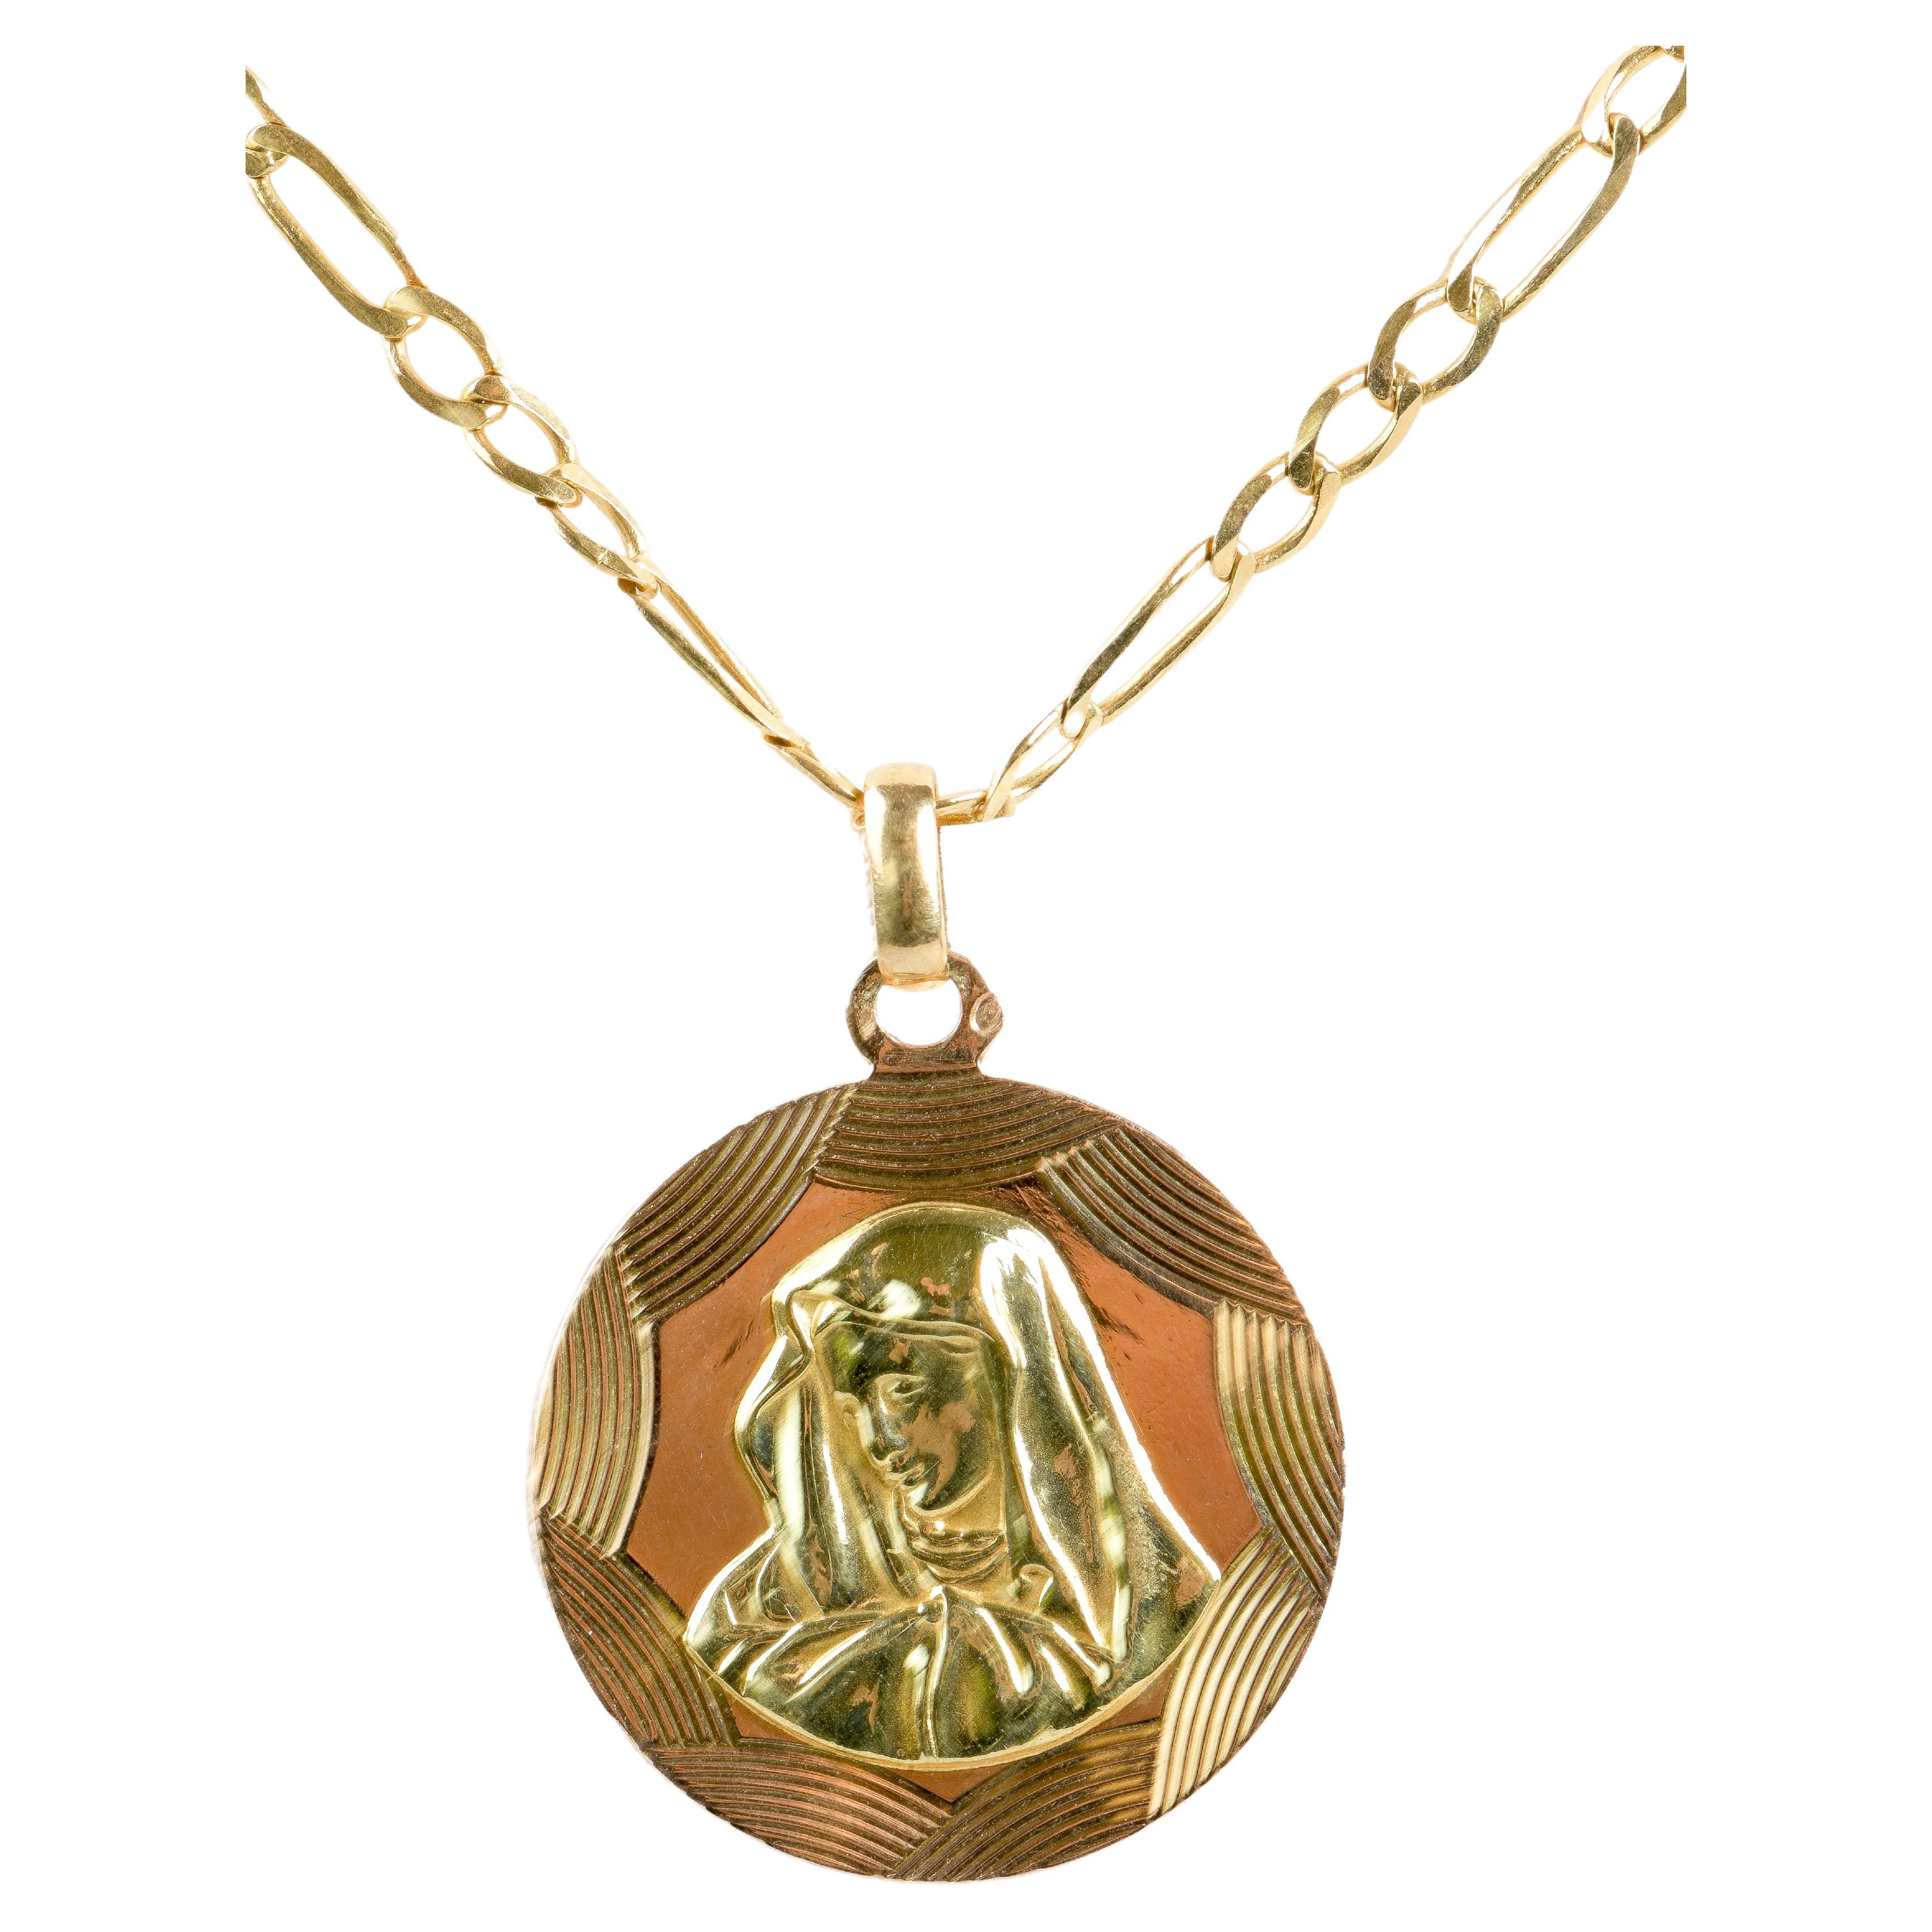 Necklace in 18-carat yellow and pink bicolor gold with a chain and a Virgin Mary For Sale